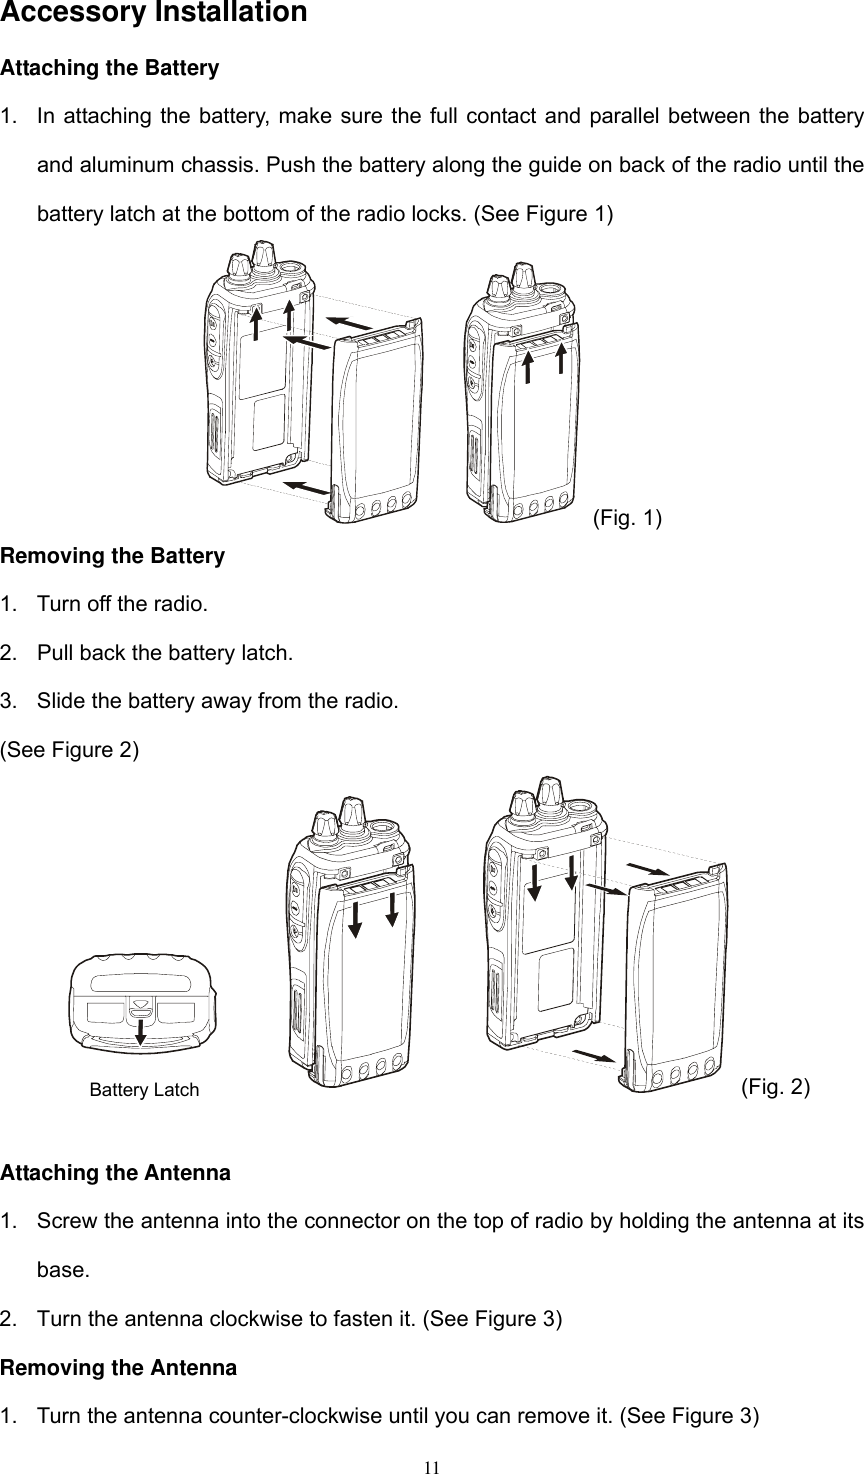  11Accessory Installation Attaching the Battery 1.  In attaching the battery, make sure the full contact and parallel between the battery and aluminum chassis. Push the battery along the guide on back of the radio until the battery latch at the bottom of the radio locks. (See Figure 1)  (Fig. 1) Removing the Battery 1.  Turn off the radio. 2.  Pull back the battery latch. 3.  Slide the battery away from the radio. (See Figure 2)   (Fig. 2)  Attaching the Antenna 1.  Screw the antenna into the connector on the top of radio by holding the antenna at its base. 2.  Turn the antenna clockwise to fasten it. (See Figure 3) Removing the Antenna 1.  Turn the antenna counter-clockwise until you can remove it. (See Figure 3) Battery Latch 